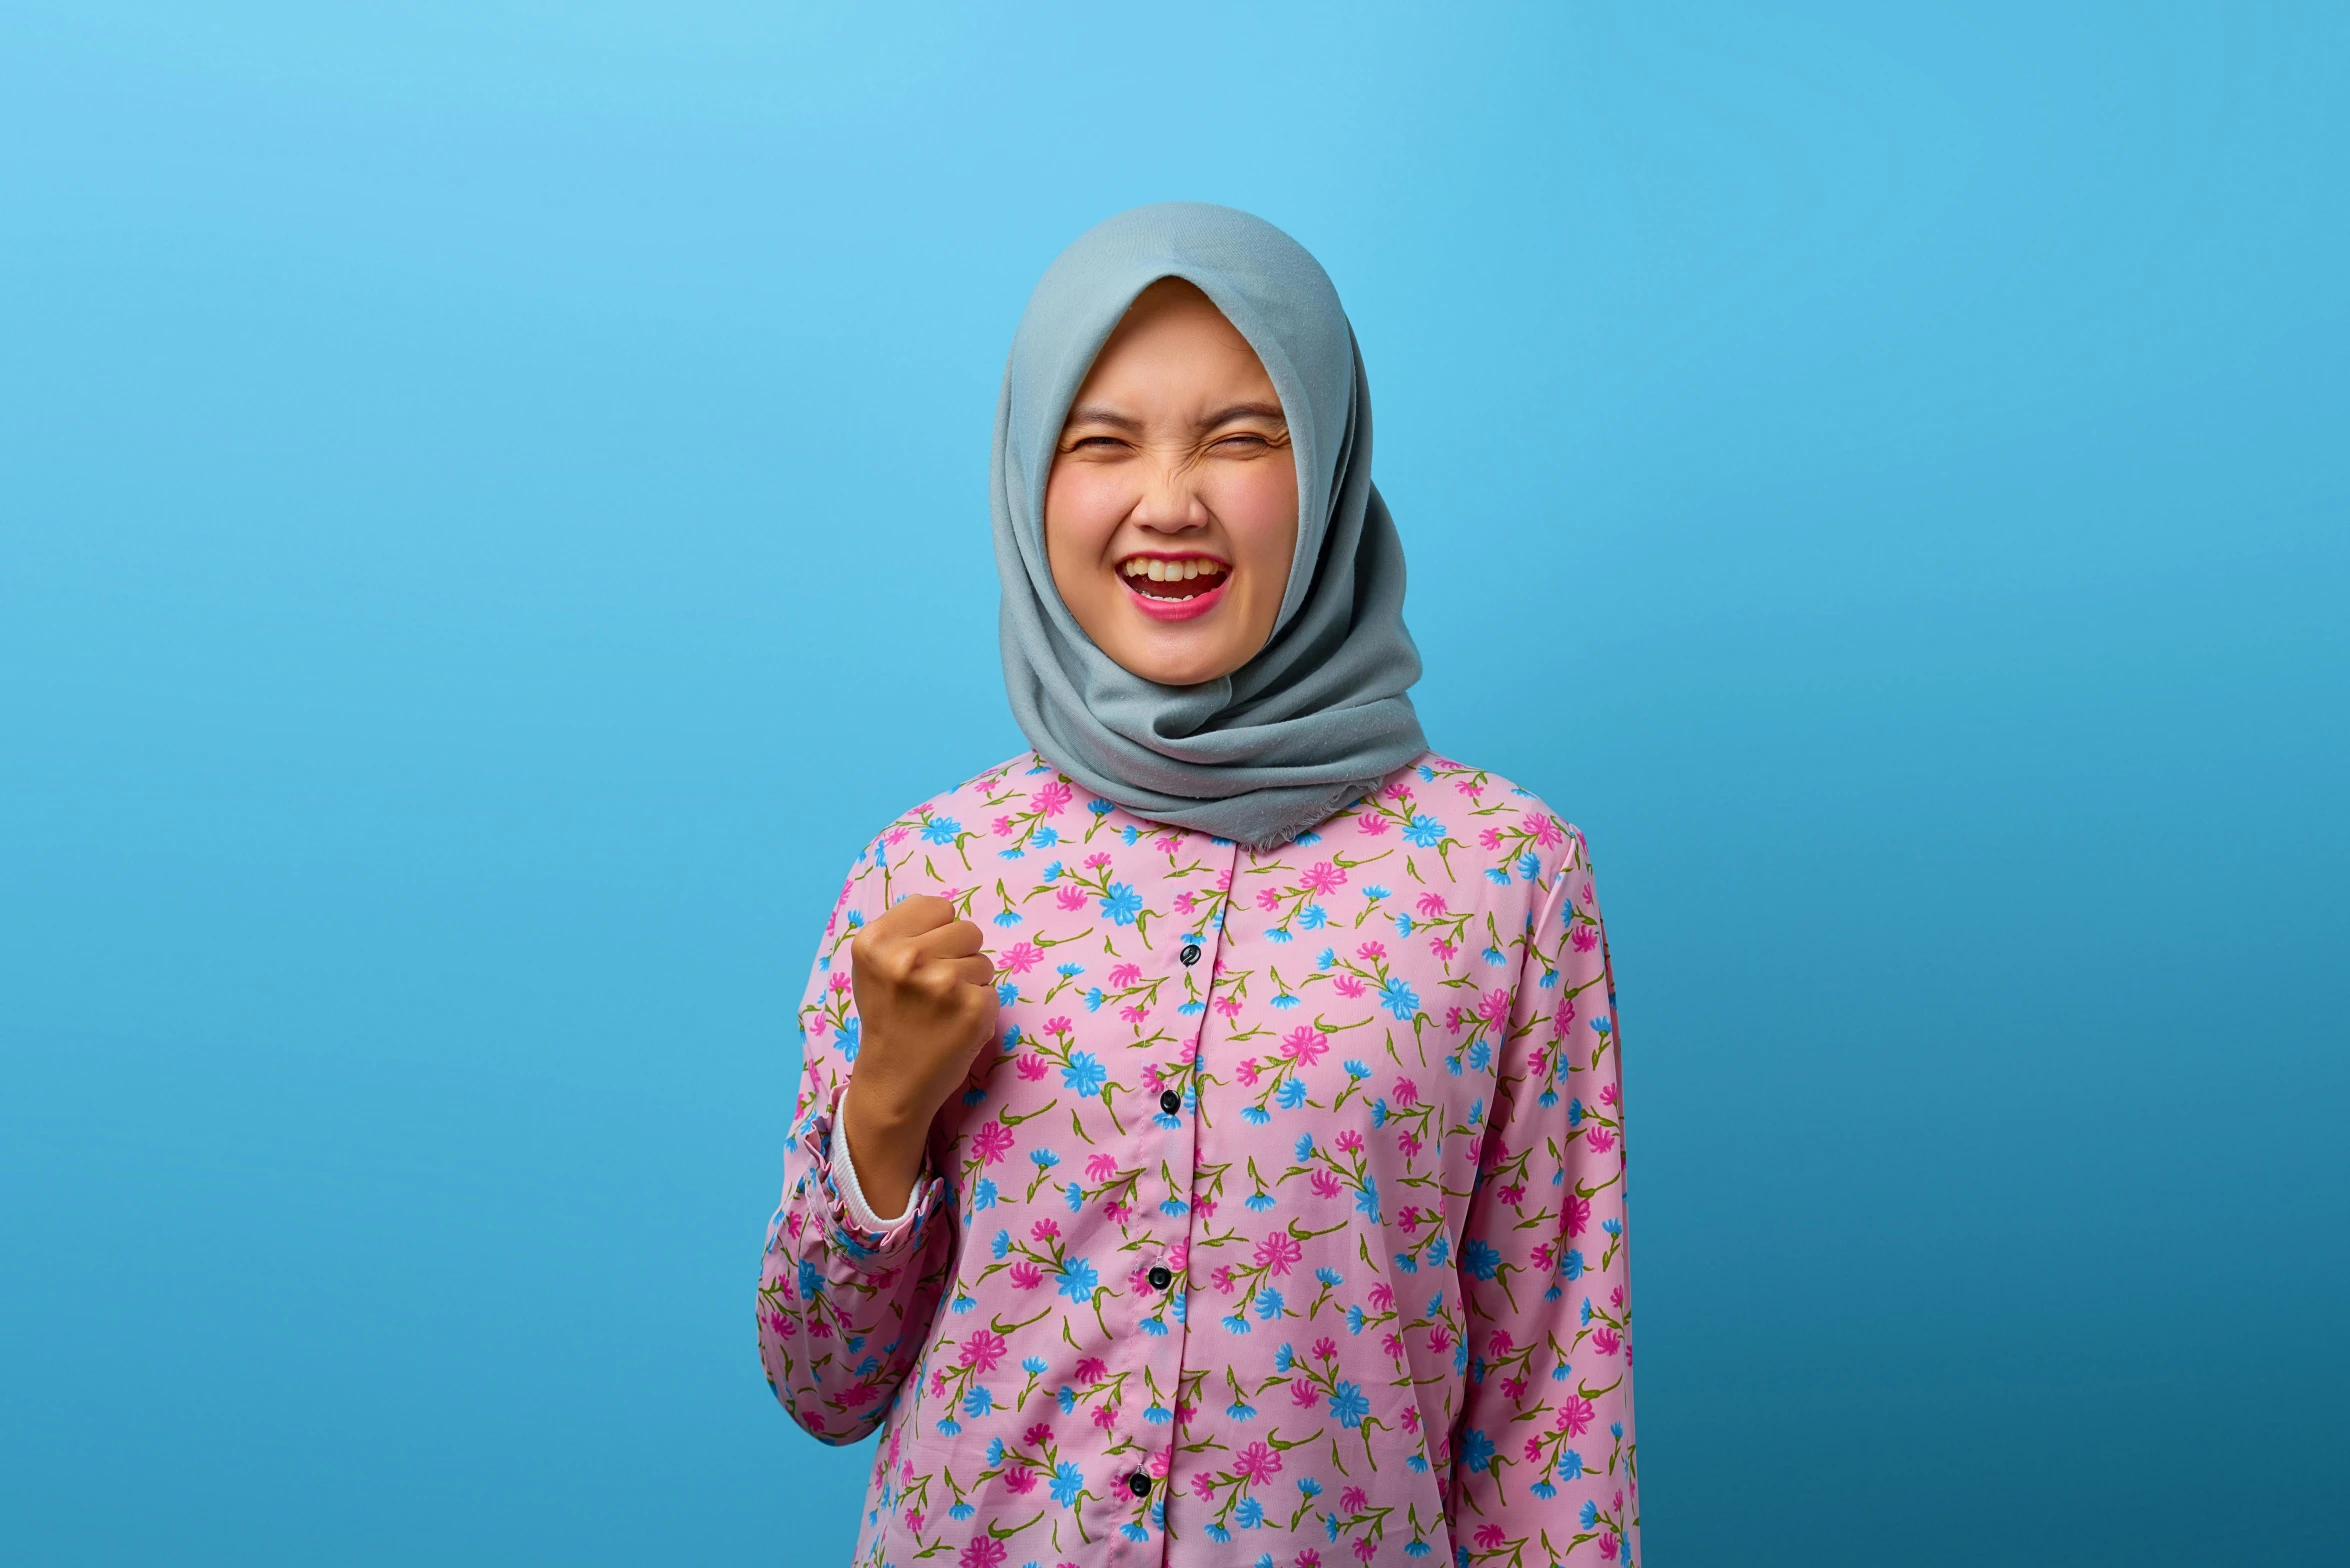 a woman wearing a hijab on a blue background, inspired by Kim Jeong-hui, shutterstock contest winner, hurufiyya, pink shirt, excitement, wearing pajamas, patterned